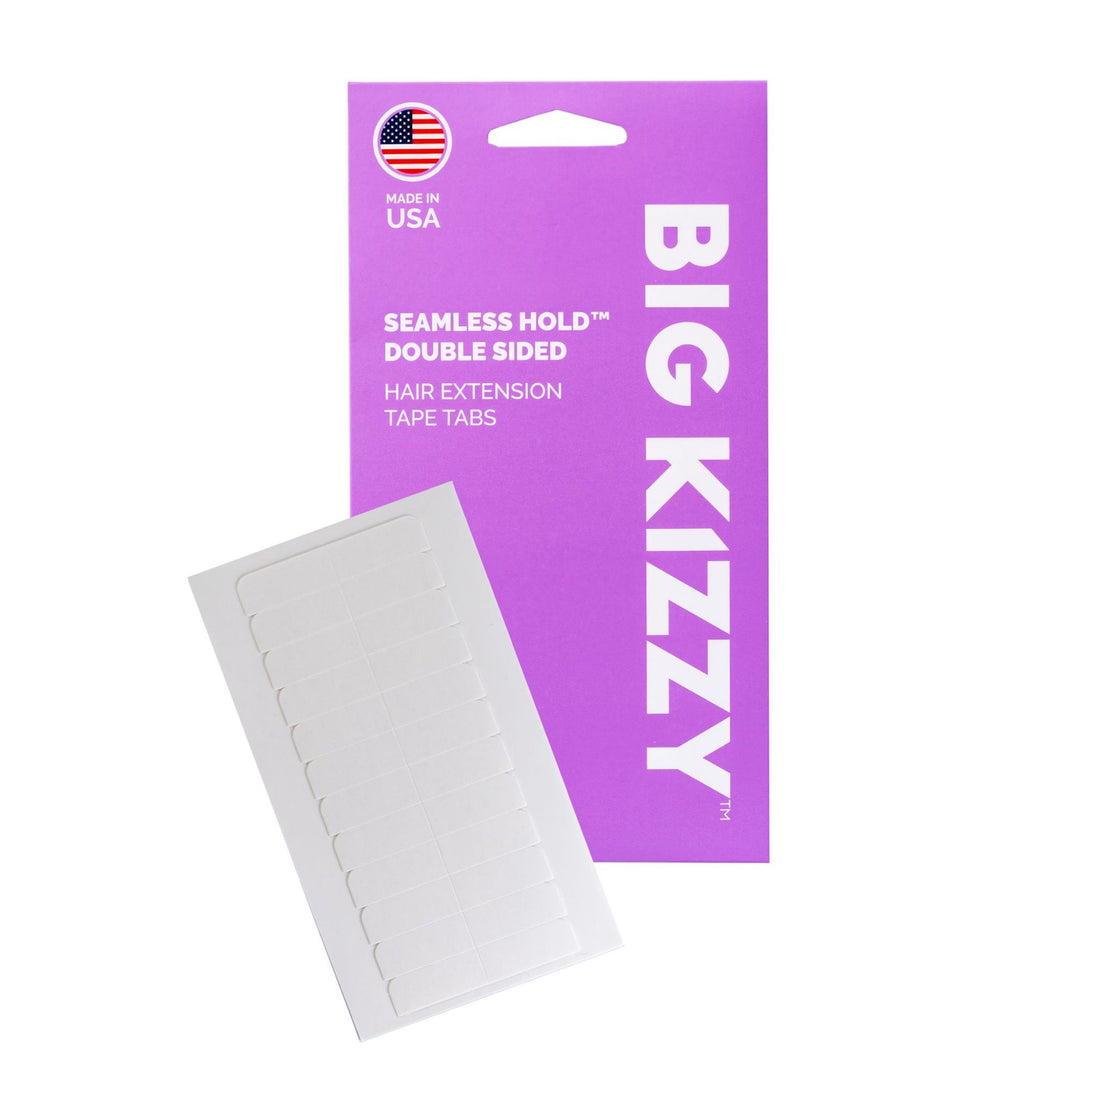 Big Kizzy® Seamless Hold Double Sided Hair Extension Replacement Tape Tabs Packaging with a single sheet of white tape tabs overlayed on top of it